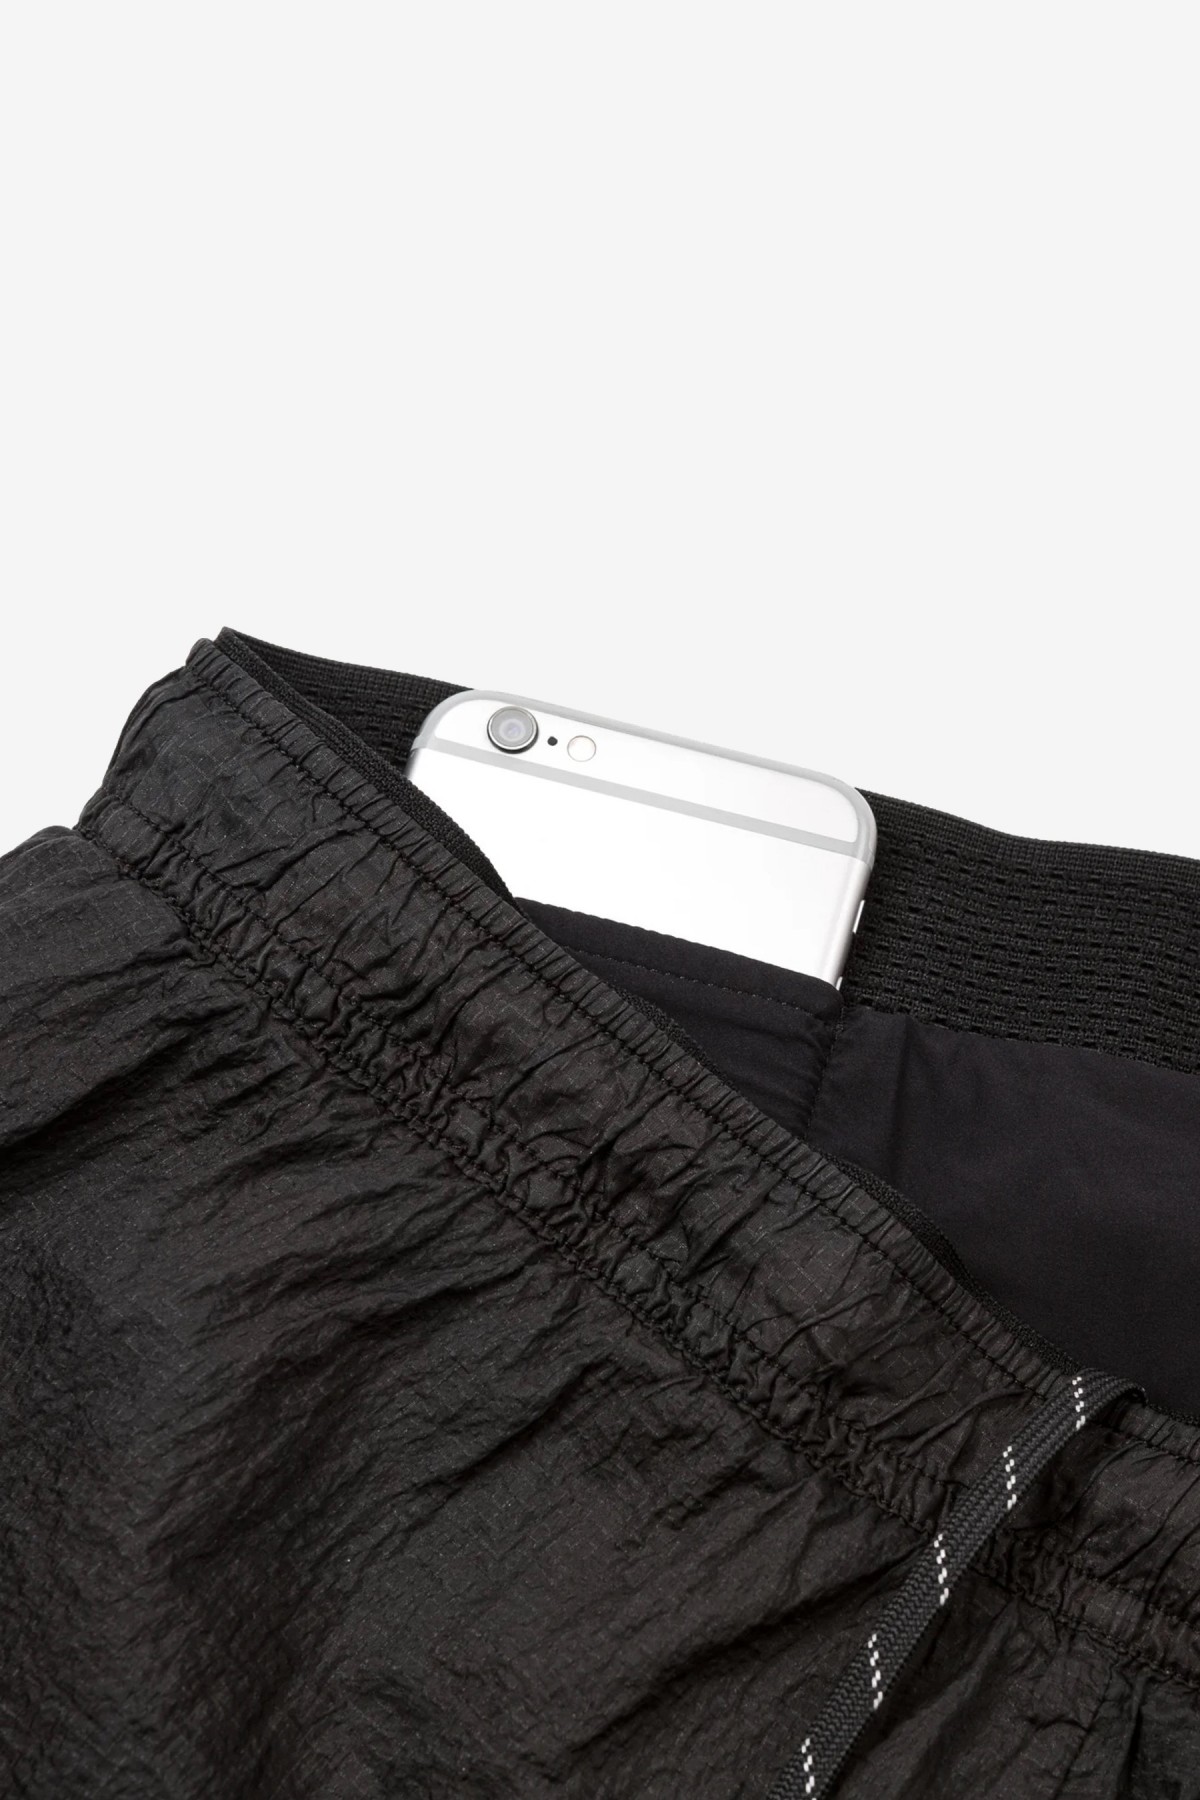 Satisfy Running Rippy 3 Trail Shorts in Aged Black